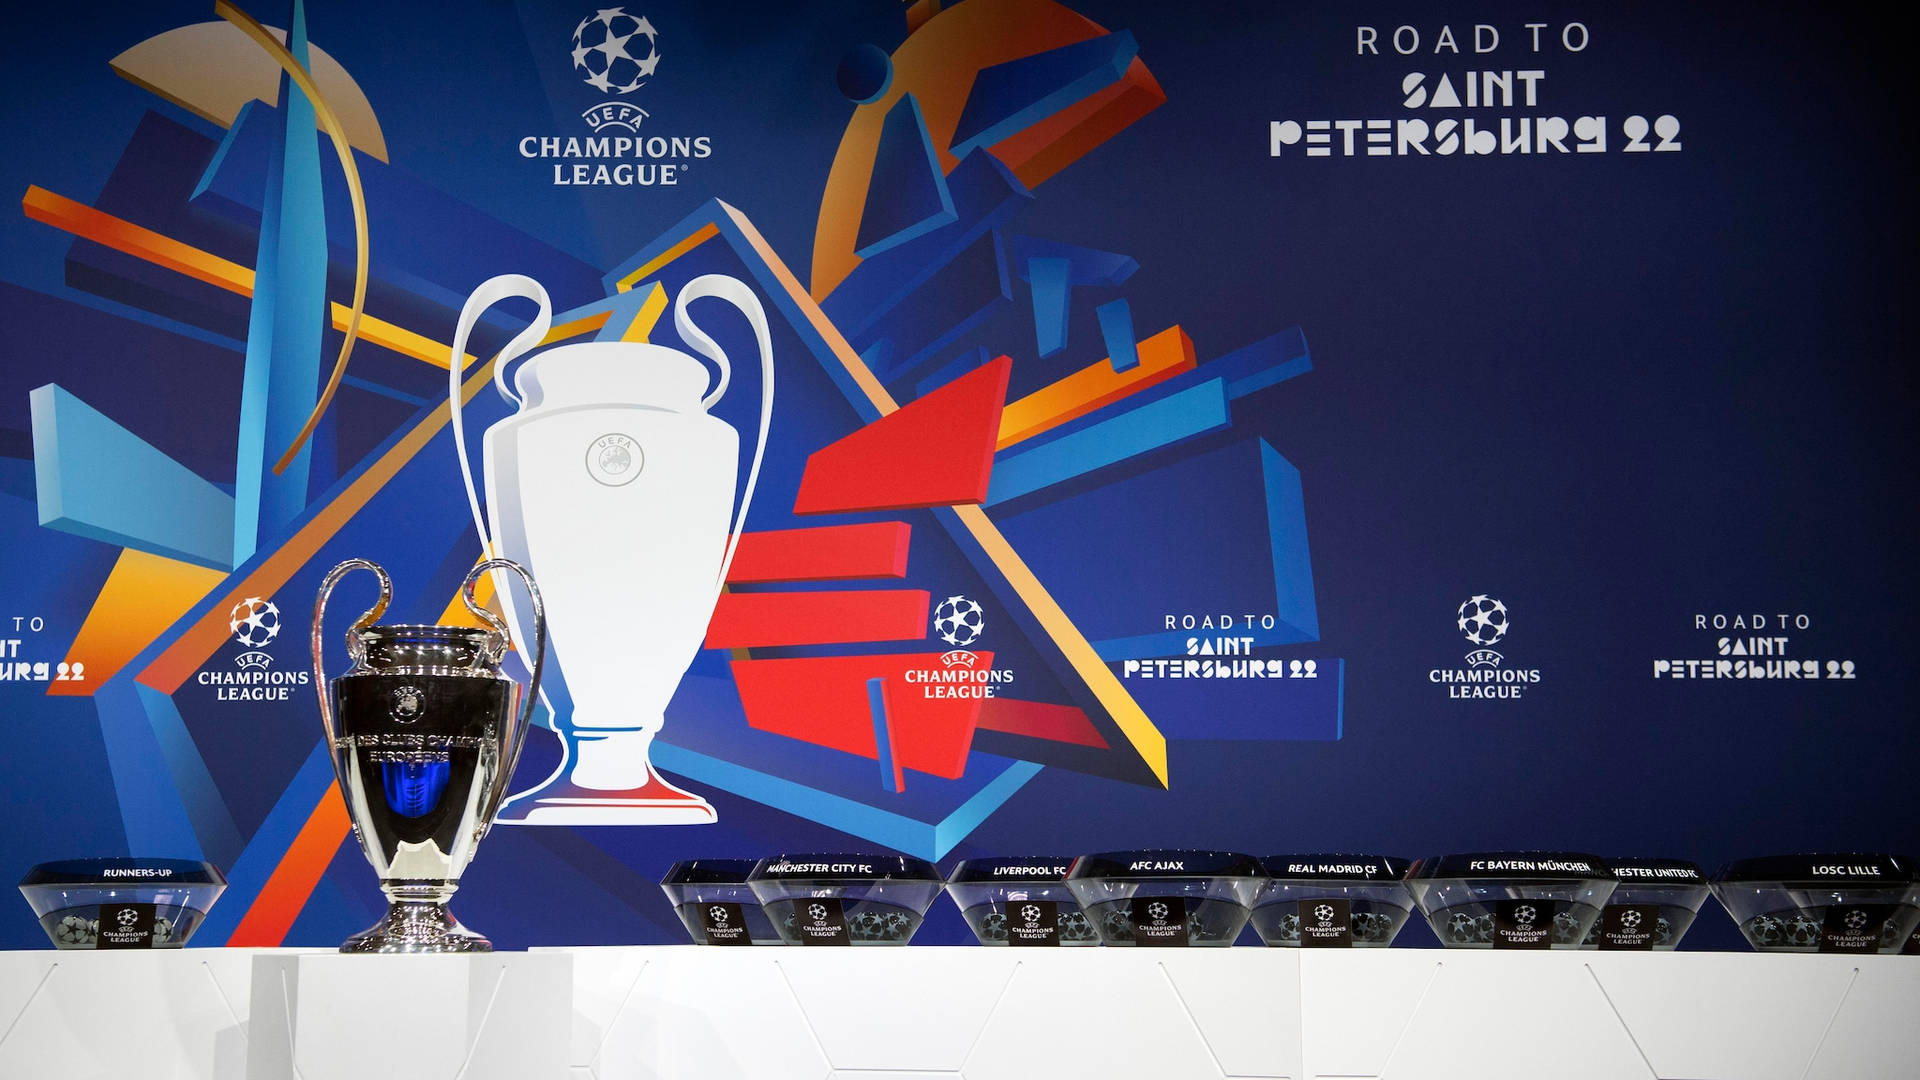 Uefa Champions League Finals In St. Petersburg 2022 Background